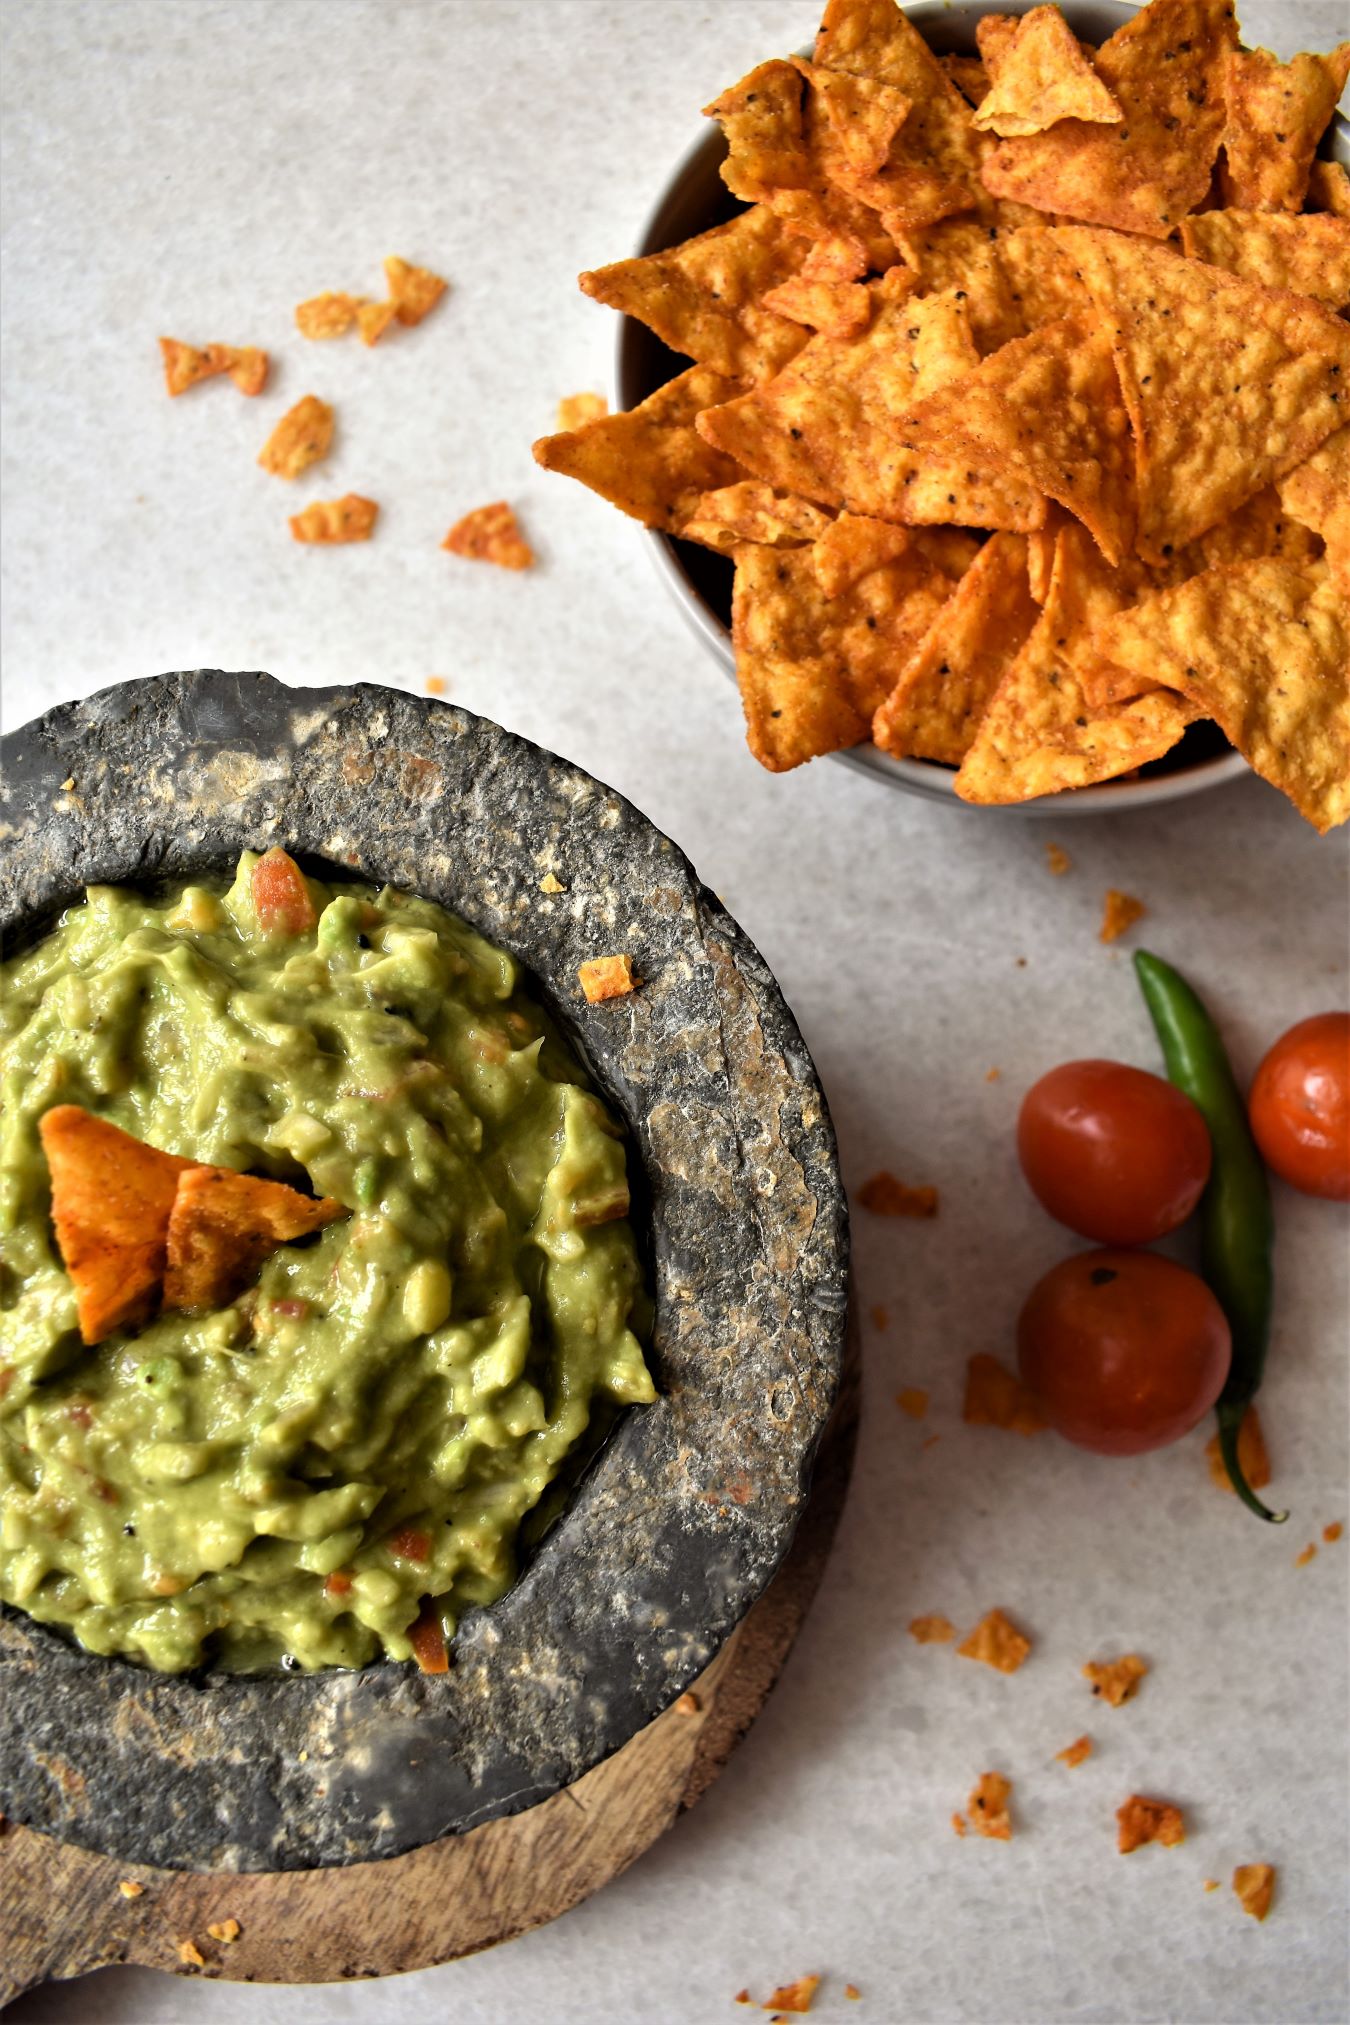 An image of a bowl of guacamole and chips on the side. 